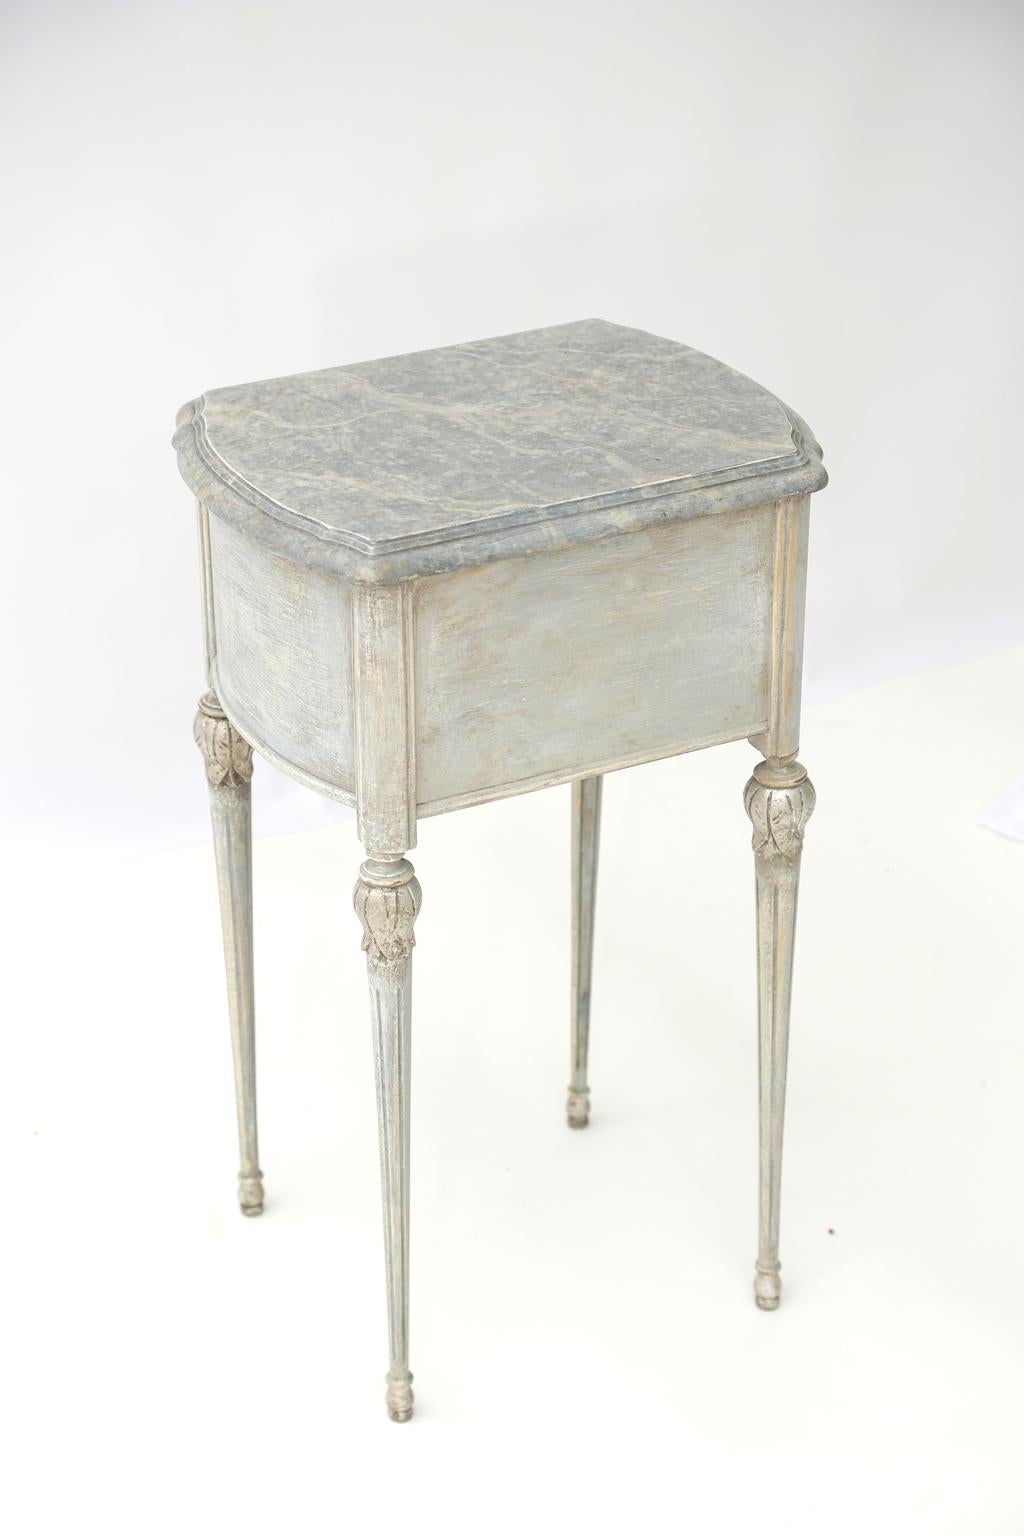 Painted French Pot Stand Side Table In Good Condition For Sale In West Palm Beach, FL